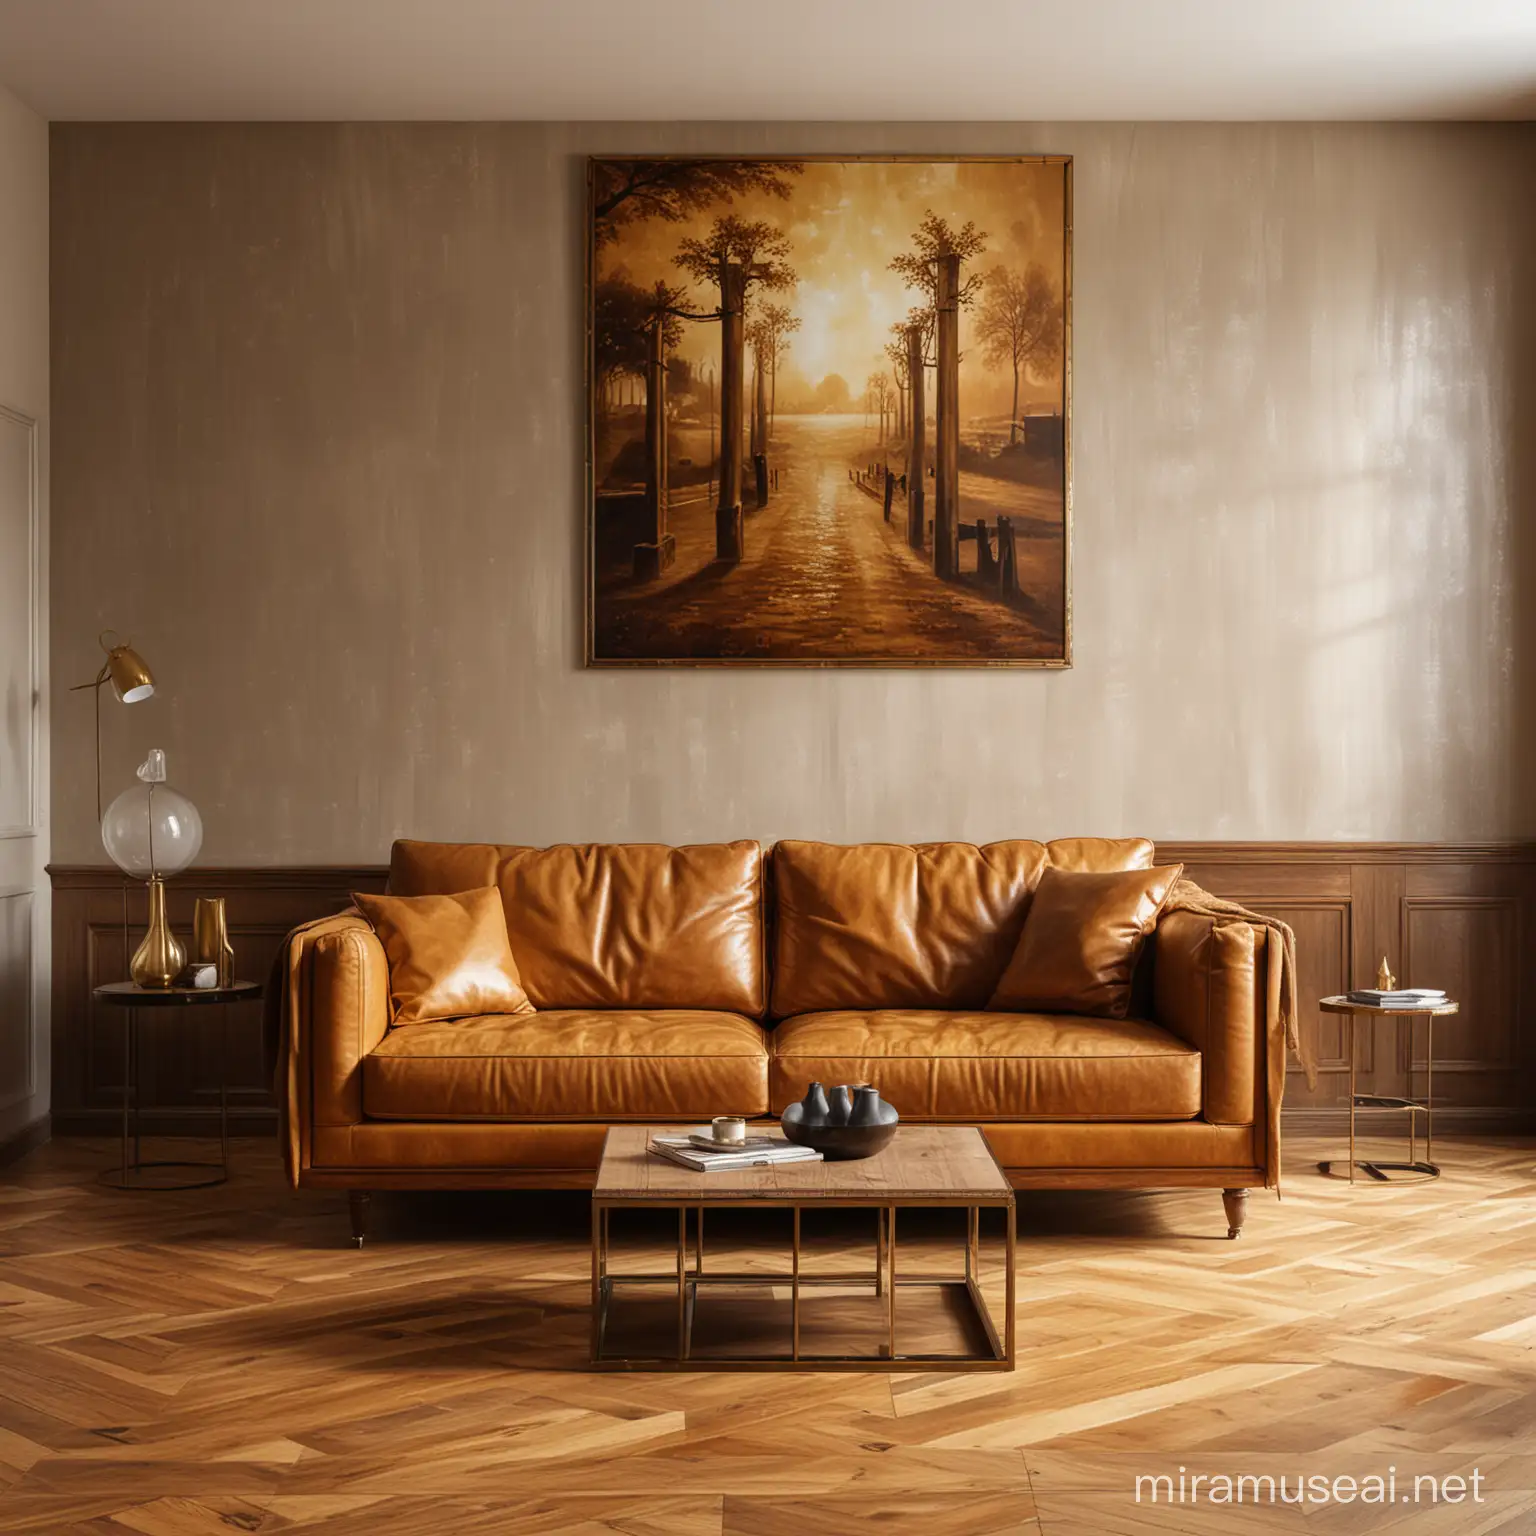 Cozy Living Room with Golden Accents and Vivid Wall Art